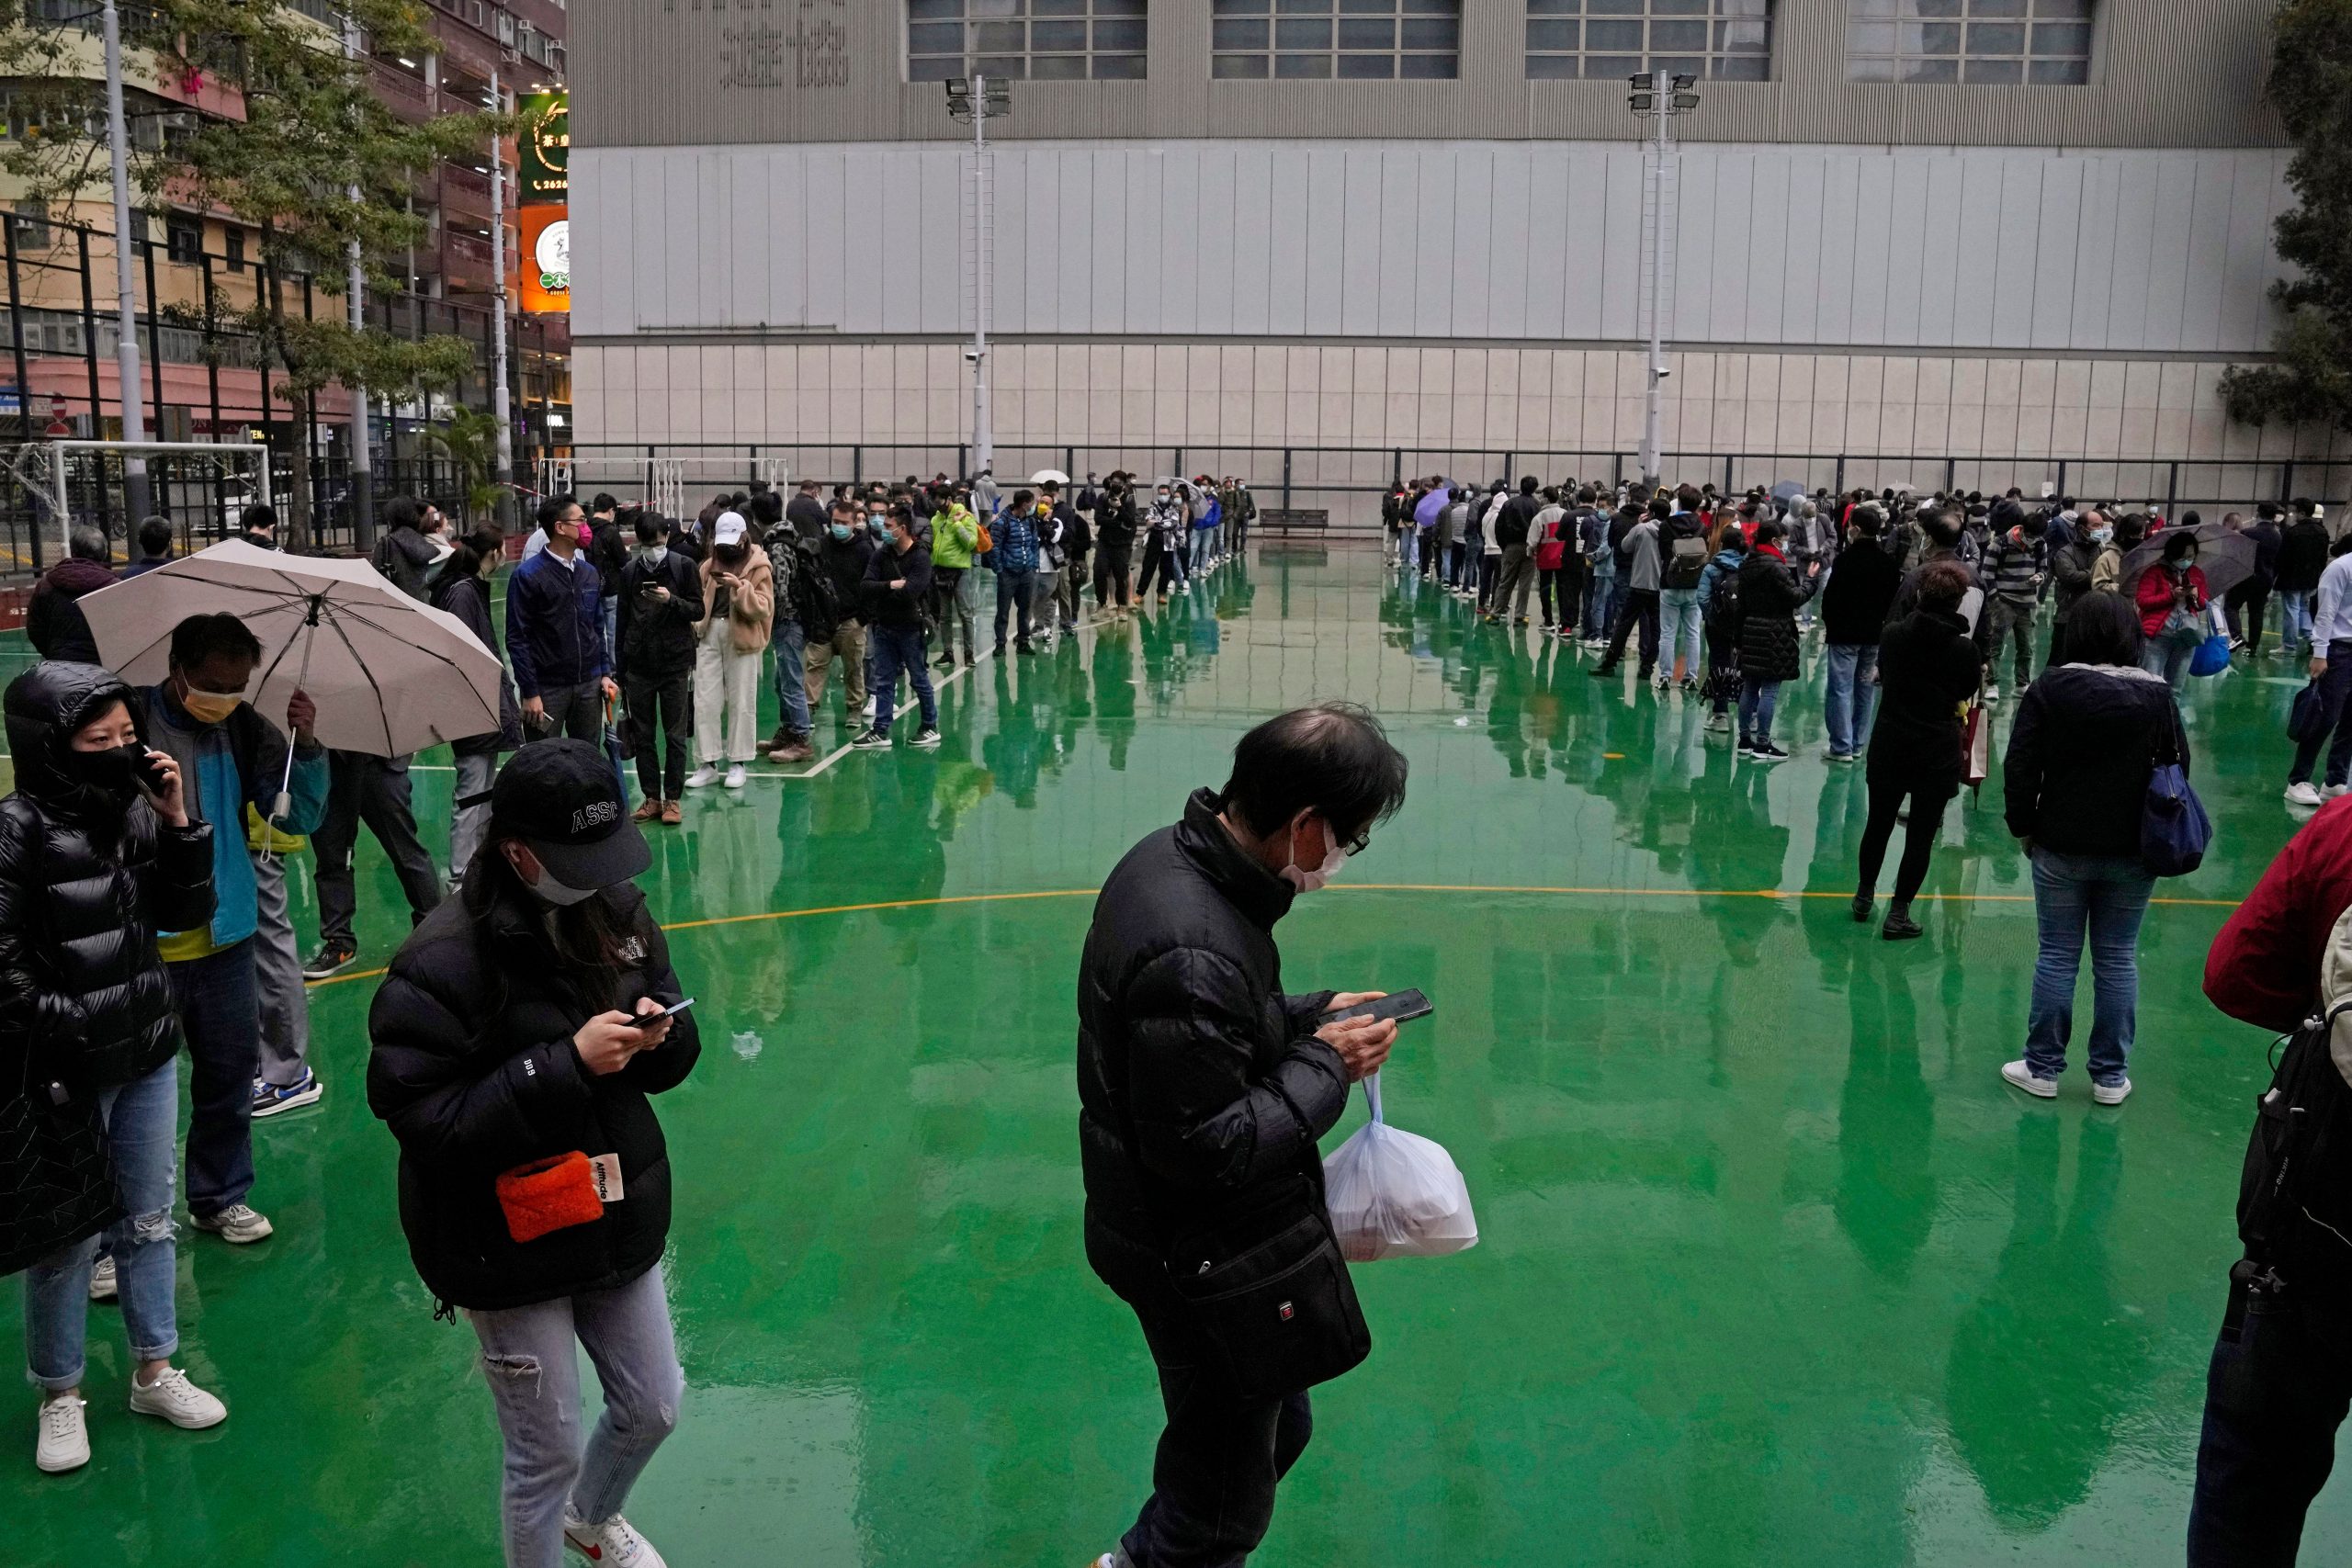 South Korea has deadliest day of pandemic amid omicron surge